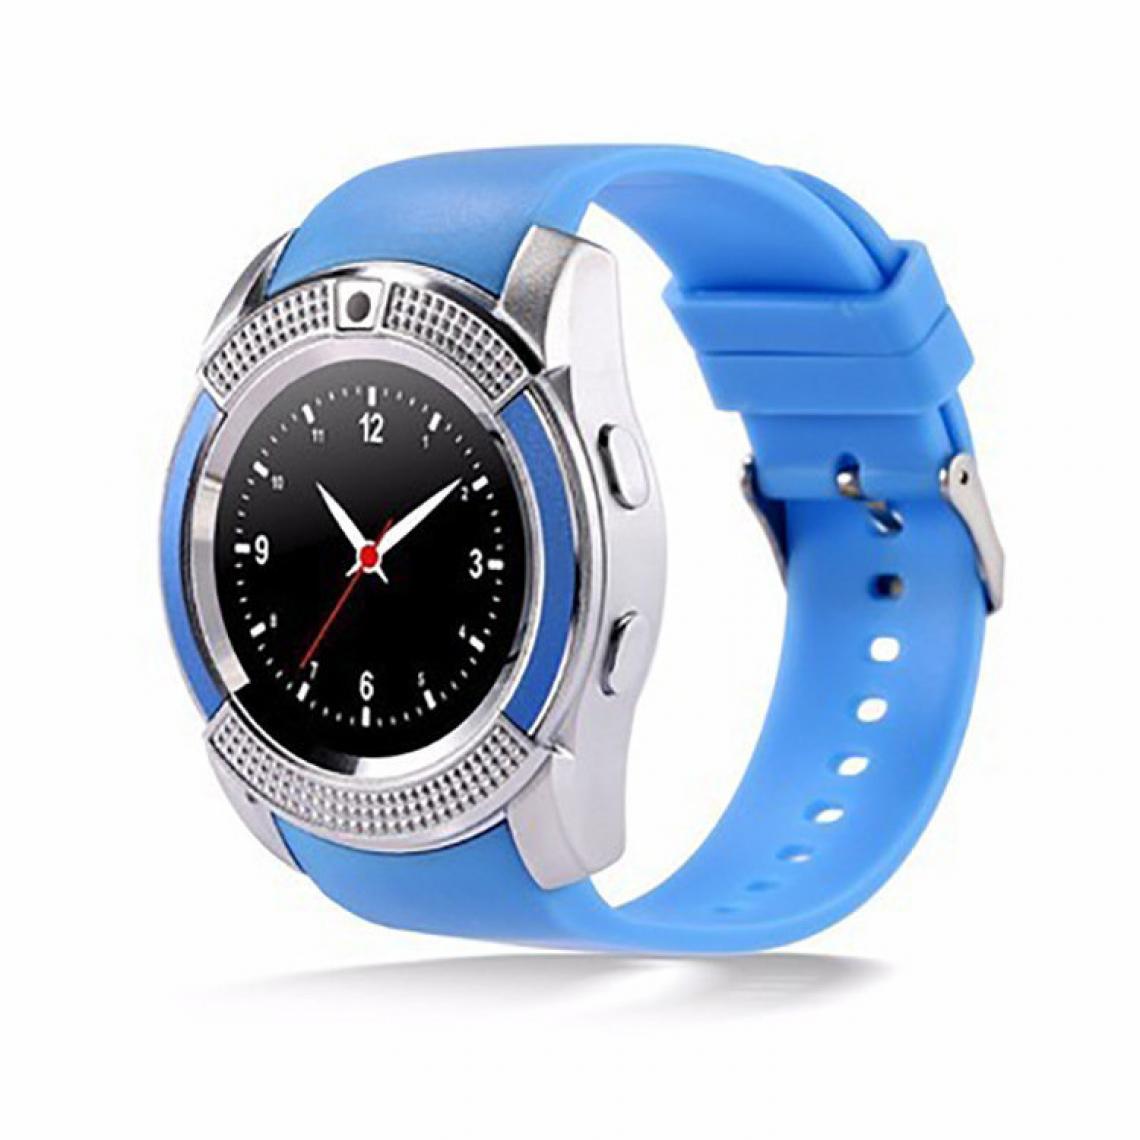 Chronotech Montres - V8 Smart Watch SIM & TF Card Support Bluetooth Smart Watch with Camera Sleep Monitor WristWatch for iOS Android Smartphones(Blue) - Montre connectée